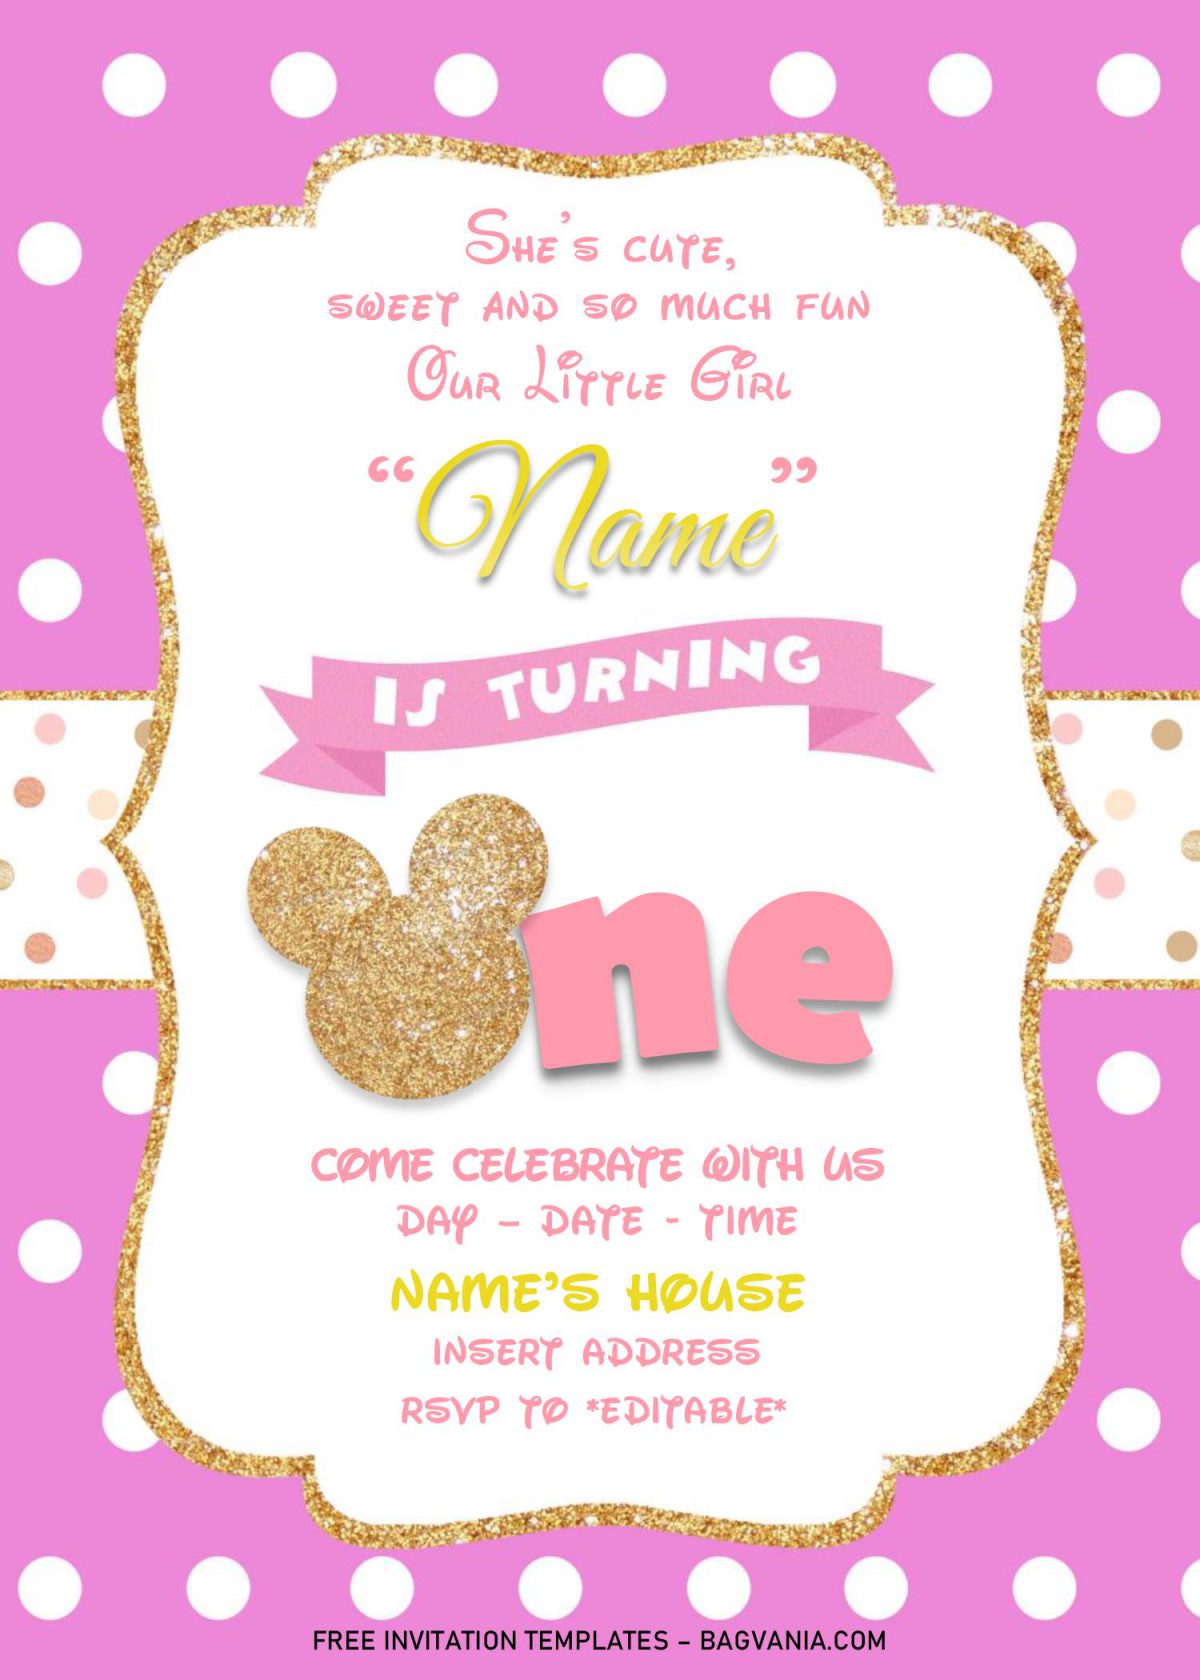 Gold Glitter Minnie Mouse Invitation Templates - Editable .Docx and has glitter Minnie's head and ears